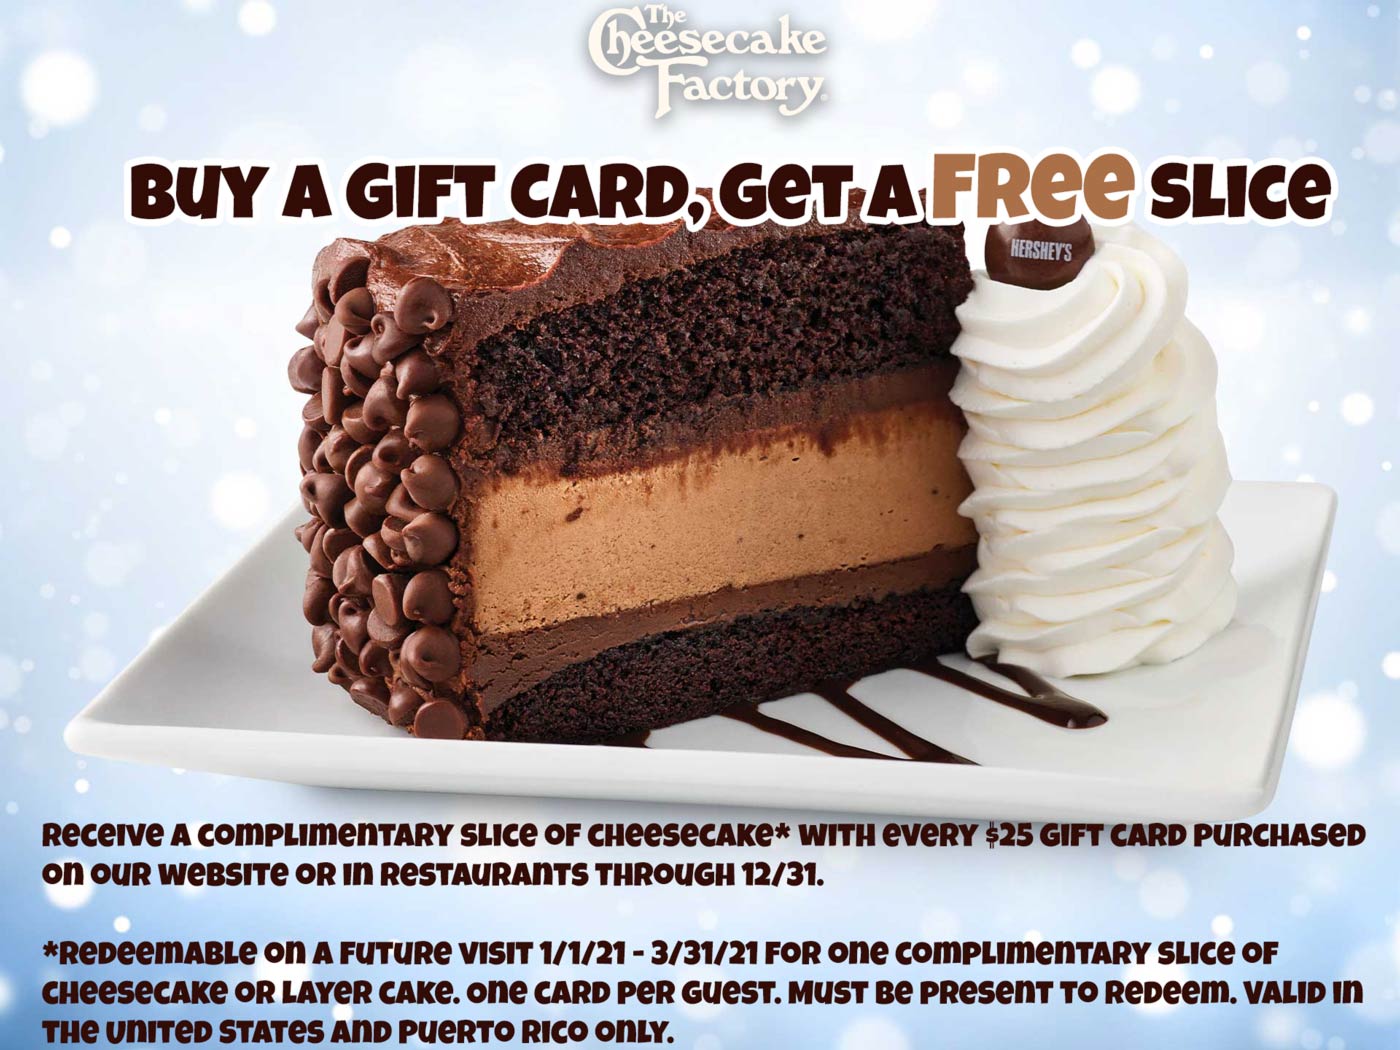 Free slice with your gift card all month at The Cheesecake Factory